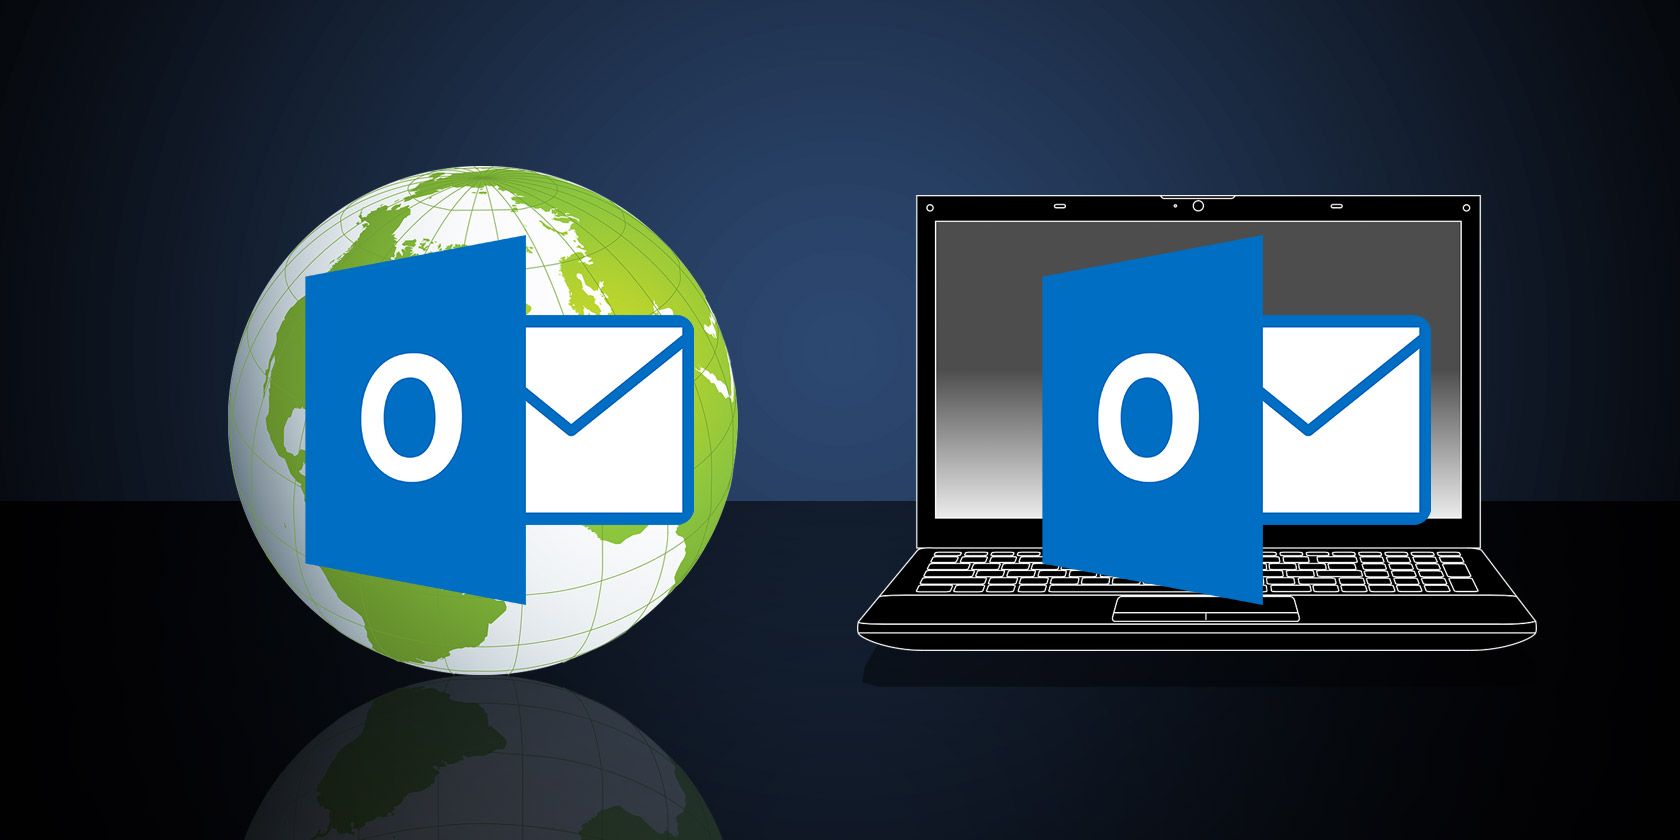 email archiving in outlook for mac